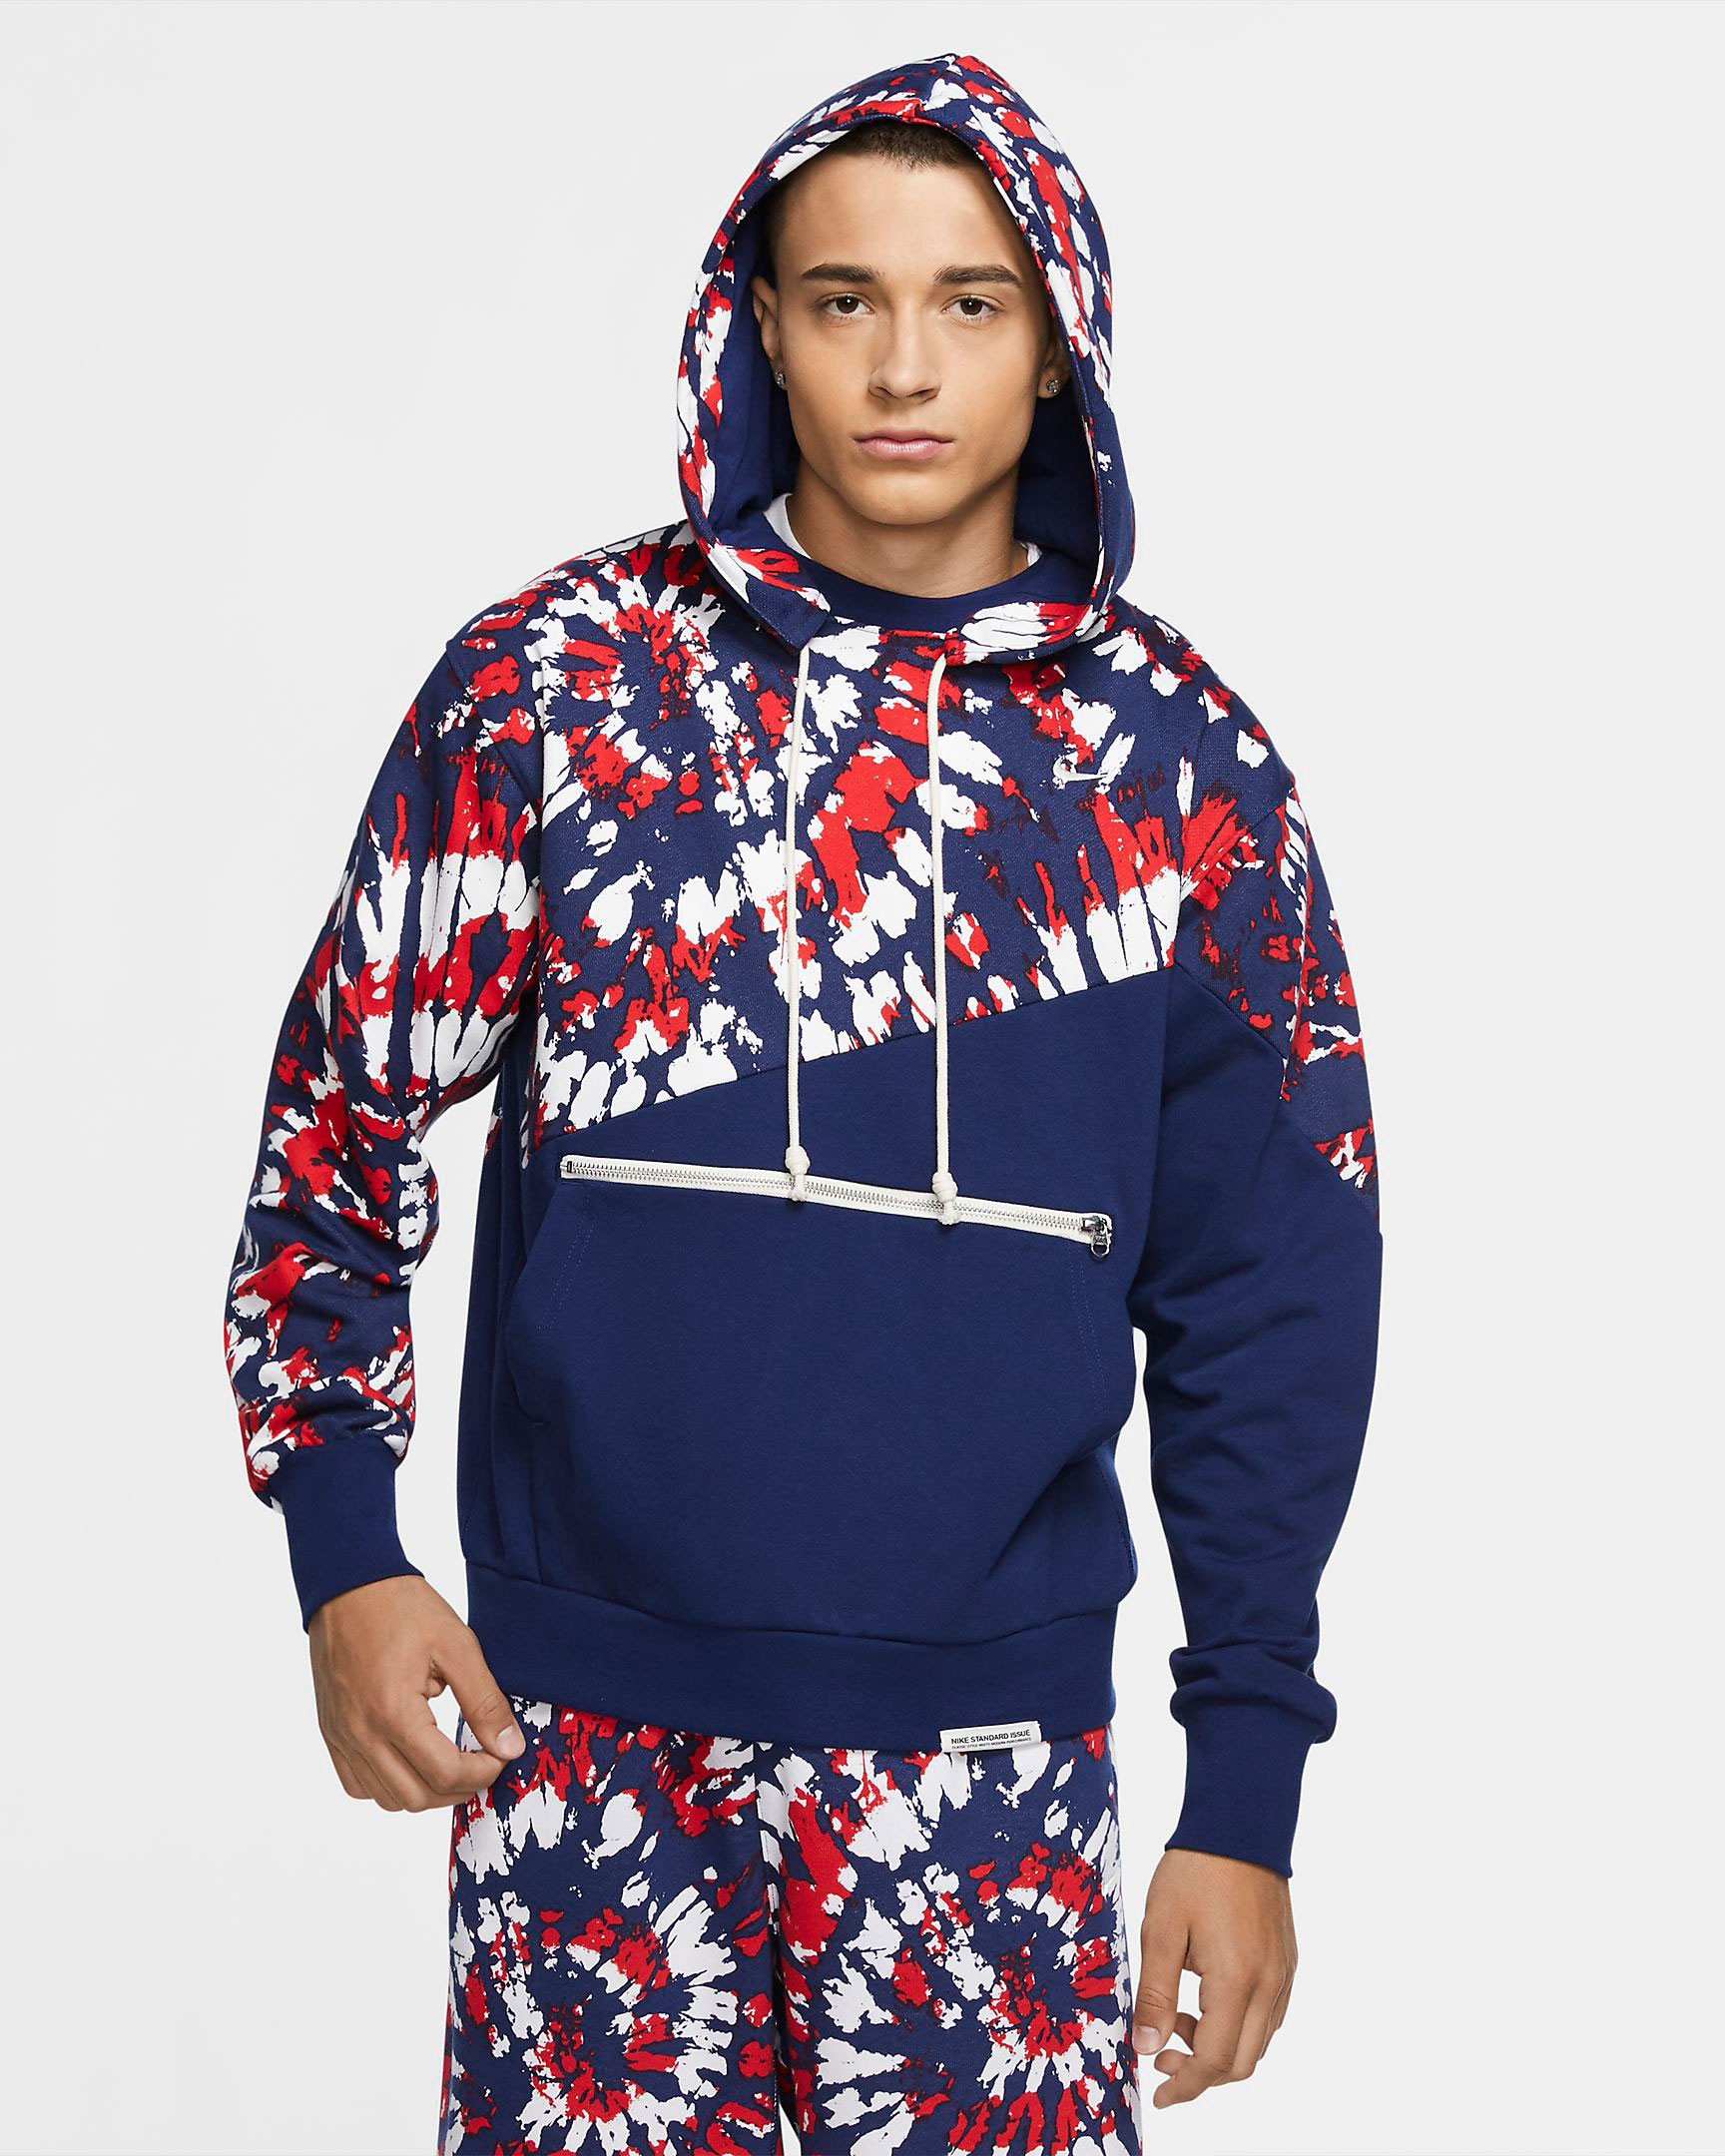 nike-kybrid-s2-what-the-usa-hoodie